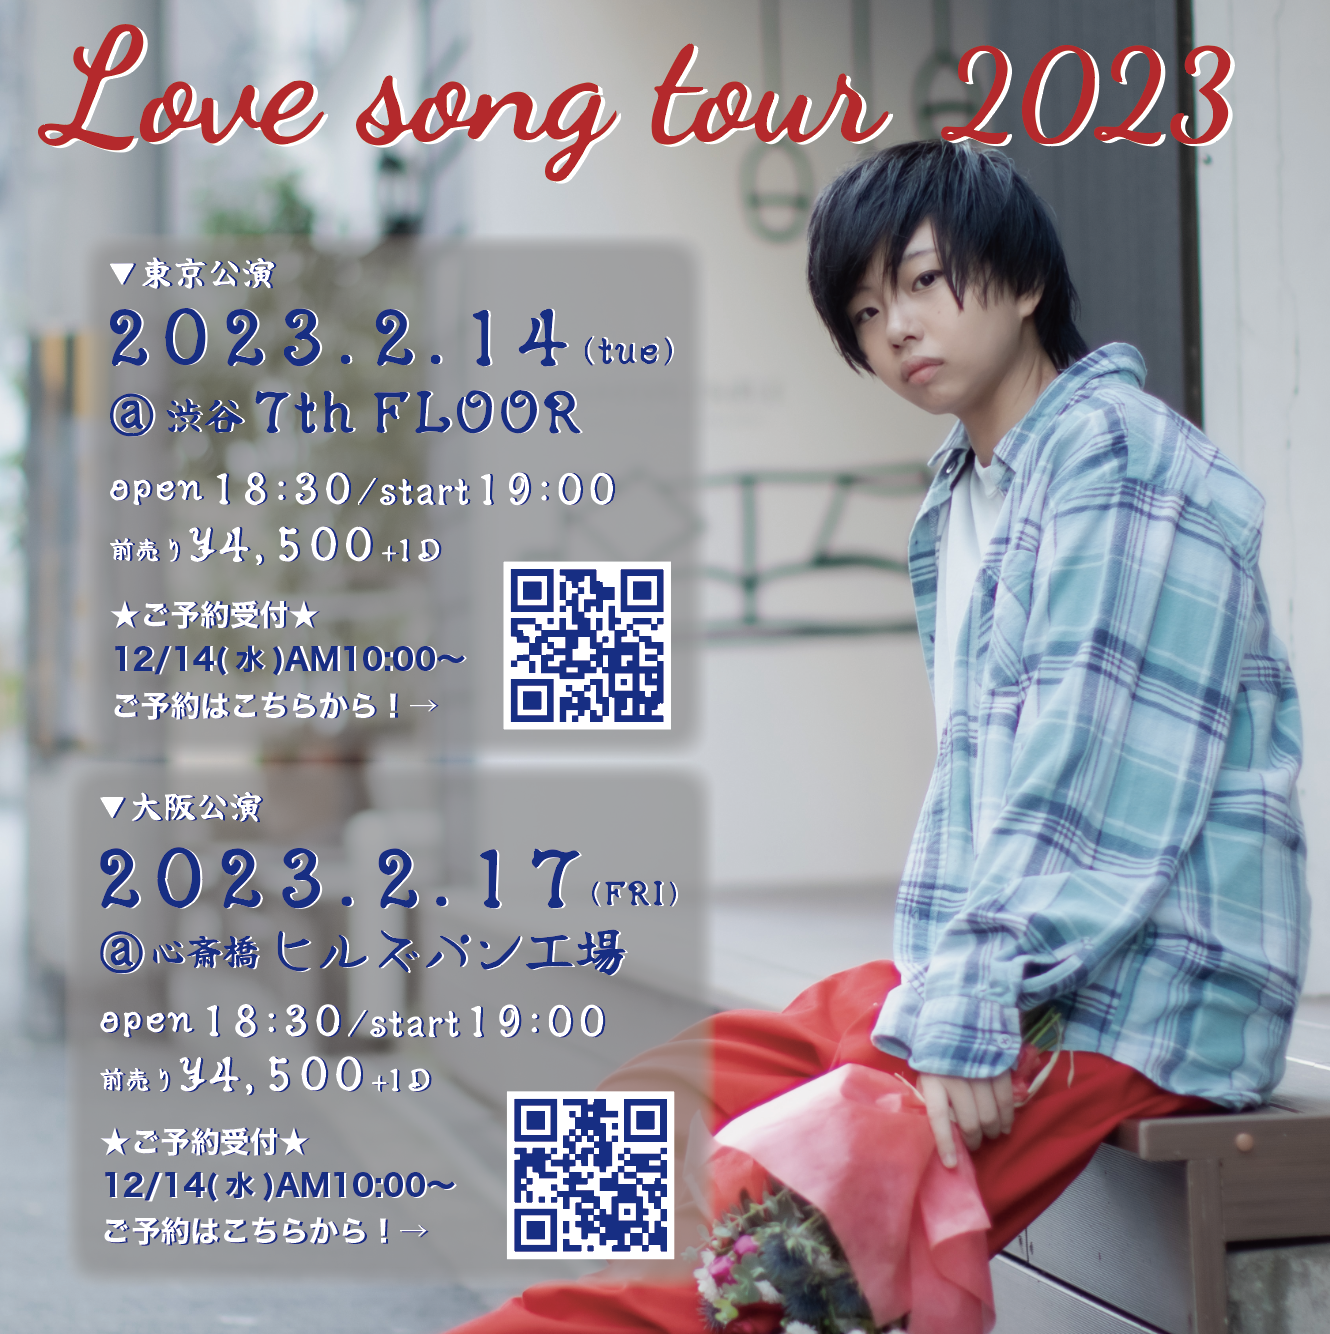 「Love song tour 2023」